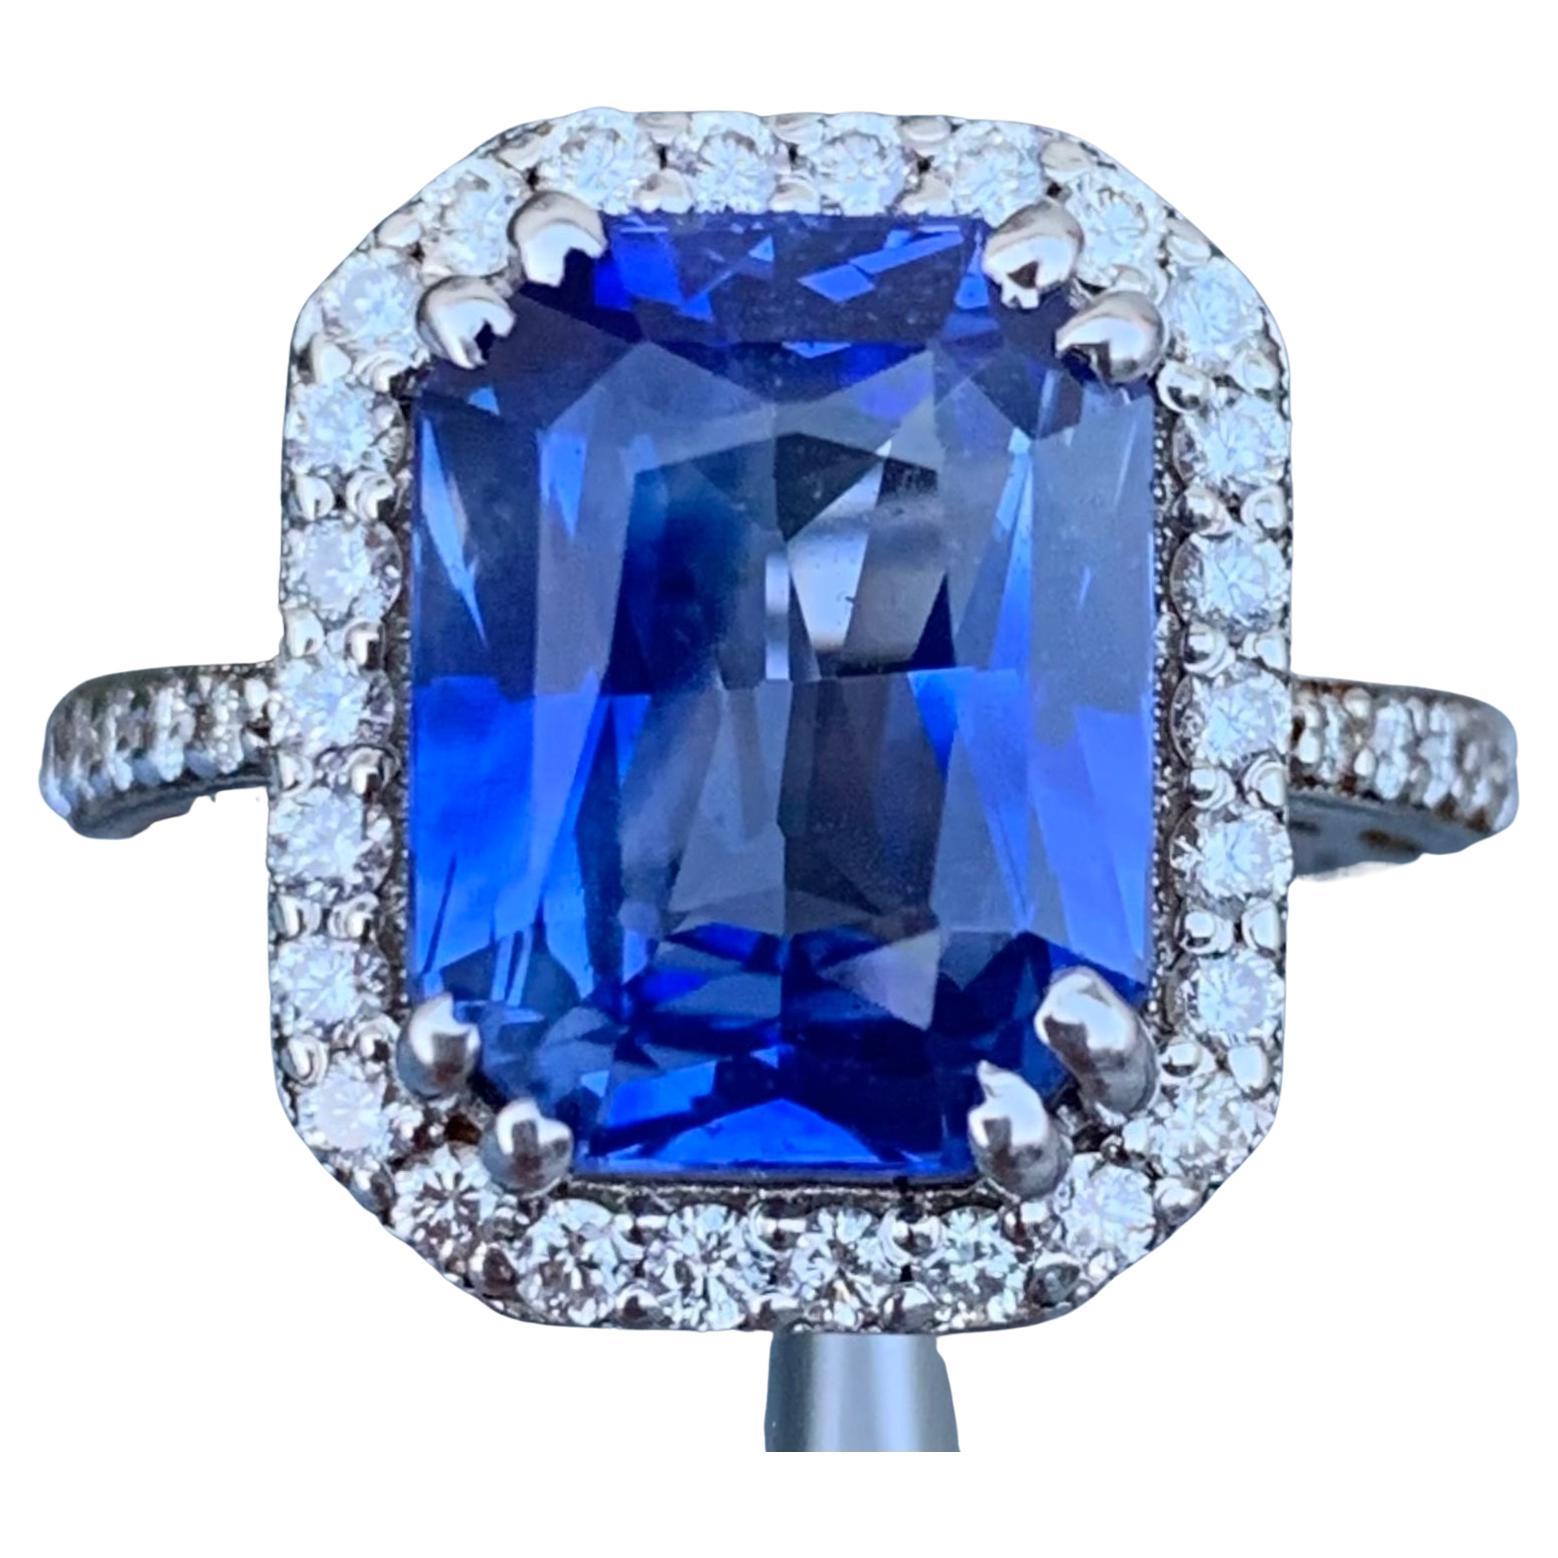 7.6 Gram Certified Royal Blue Sapphire Around Diamond Engagement Ring For Ladies For Sale